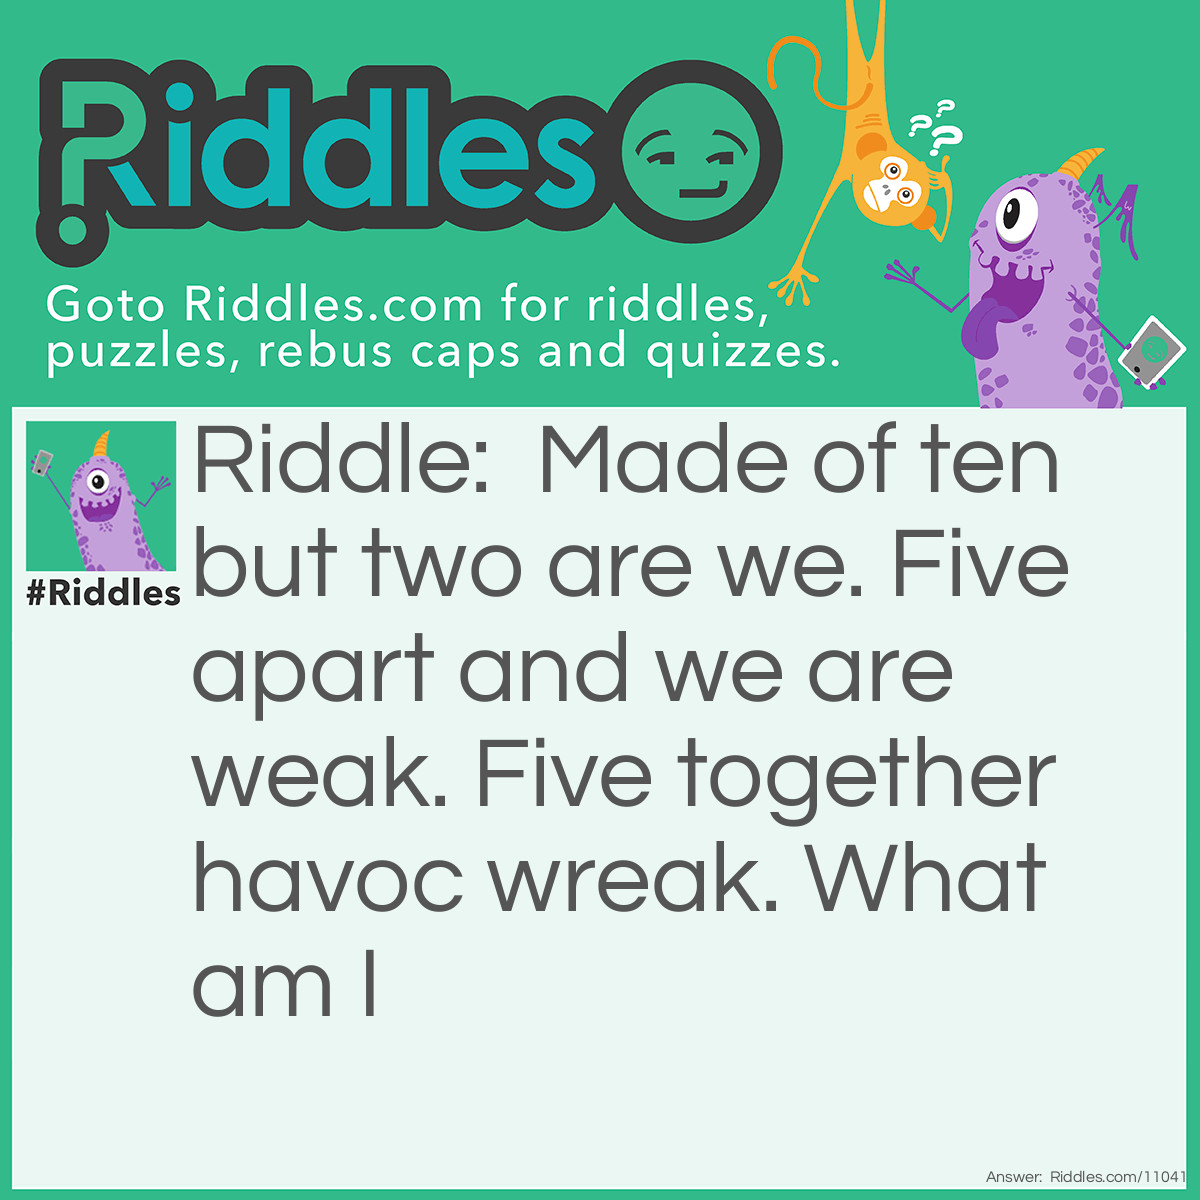 Riddle: Made of ten but two are we. Five apart and we are weak. Five together havoc wreak. What am I Answer: Fists.